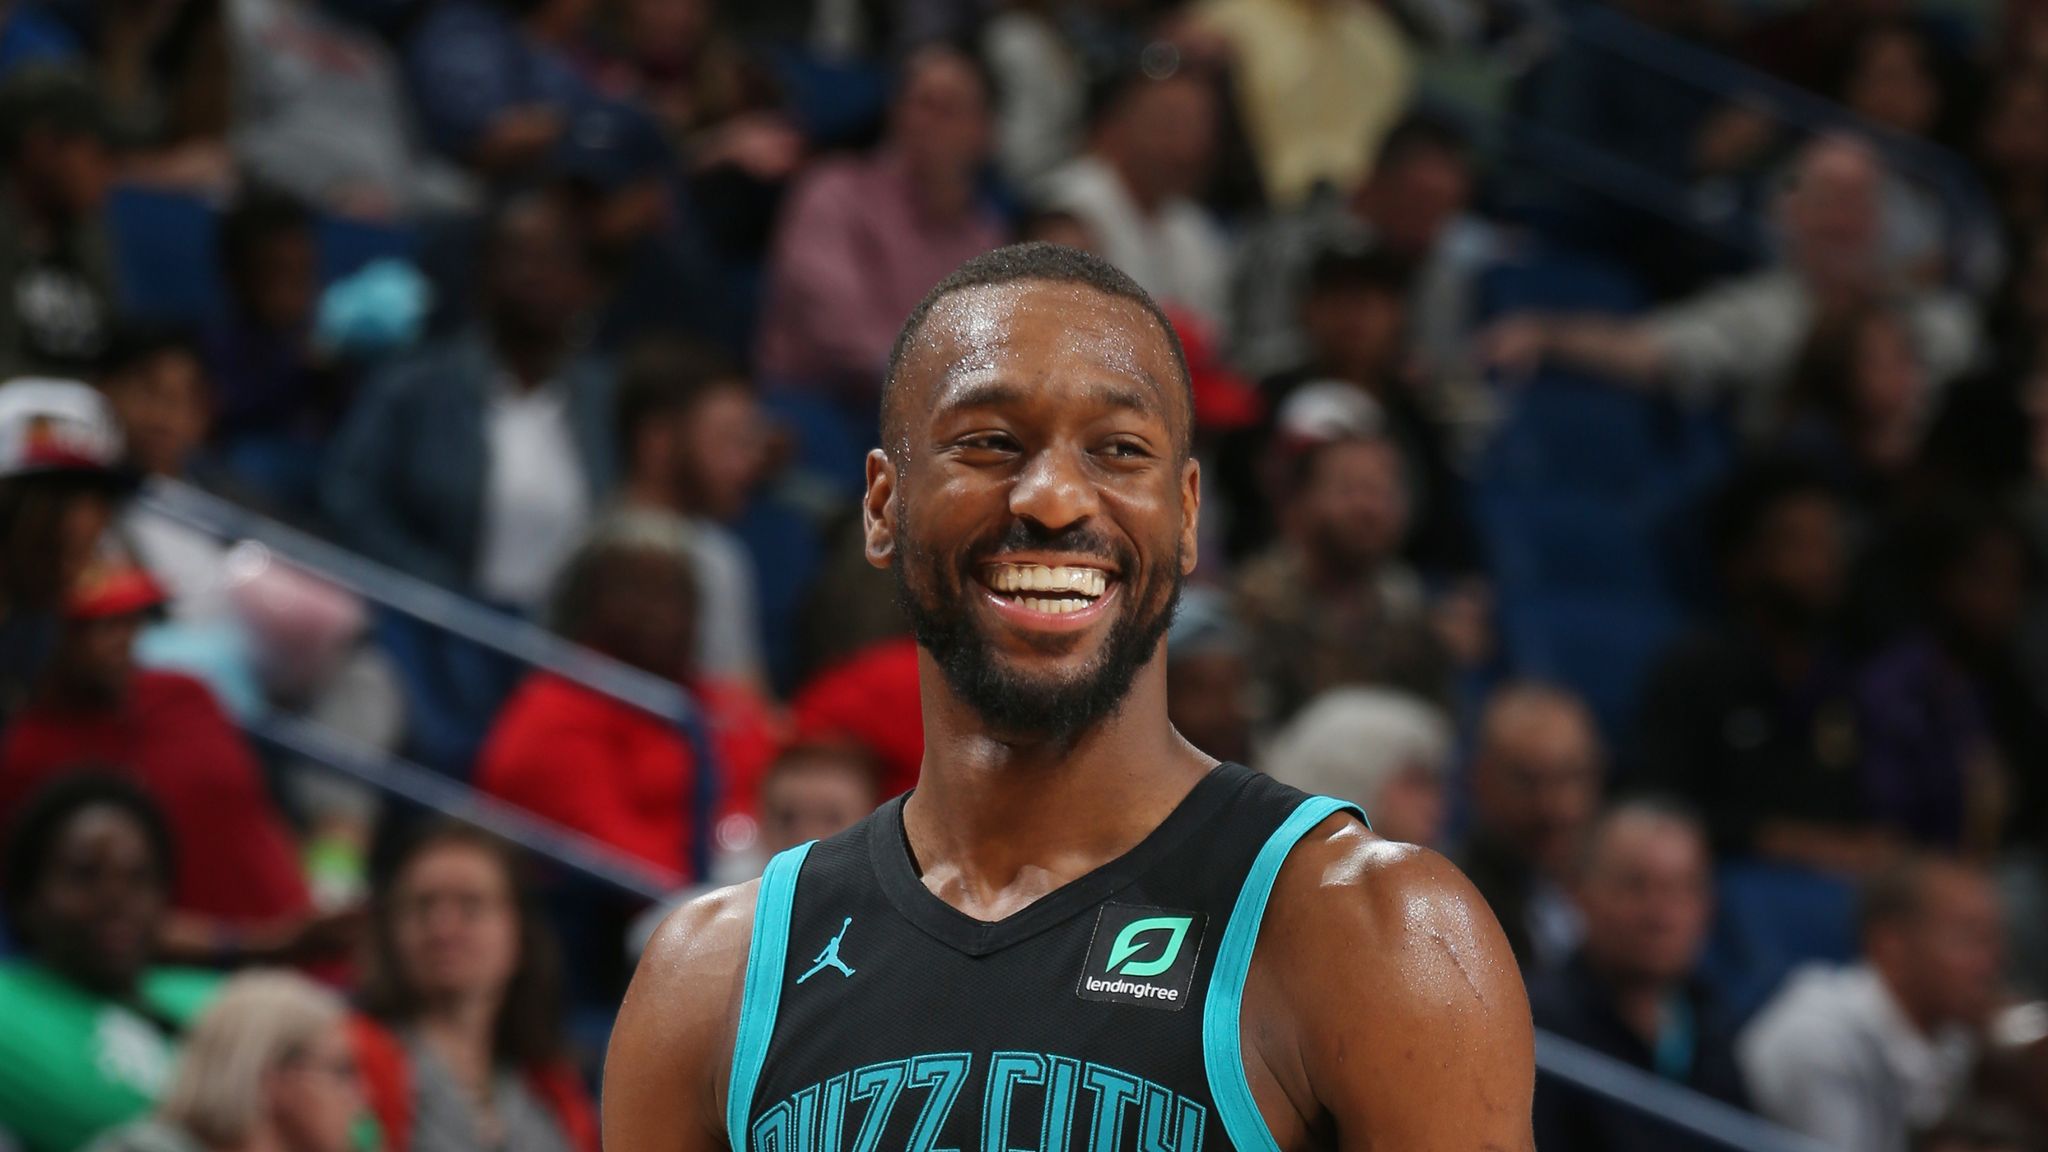 Kemba Walker intends to sign with Boston Celtics: reports